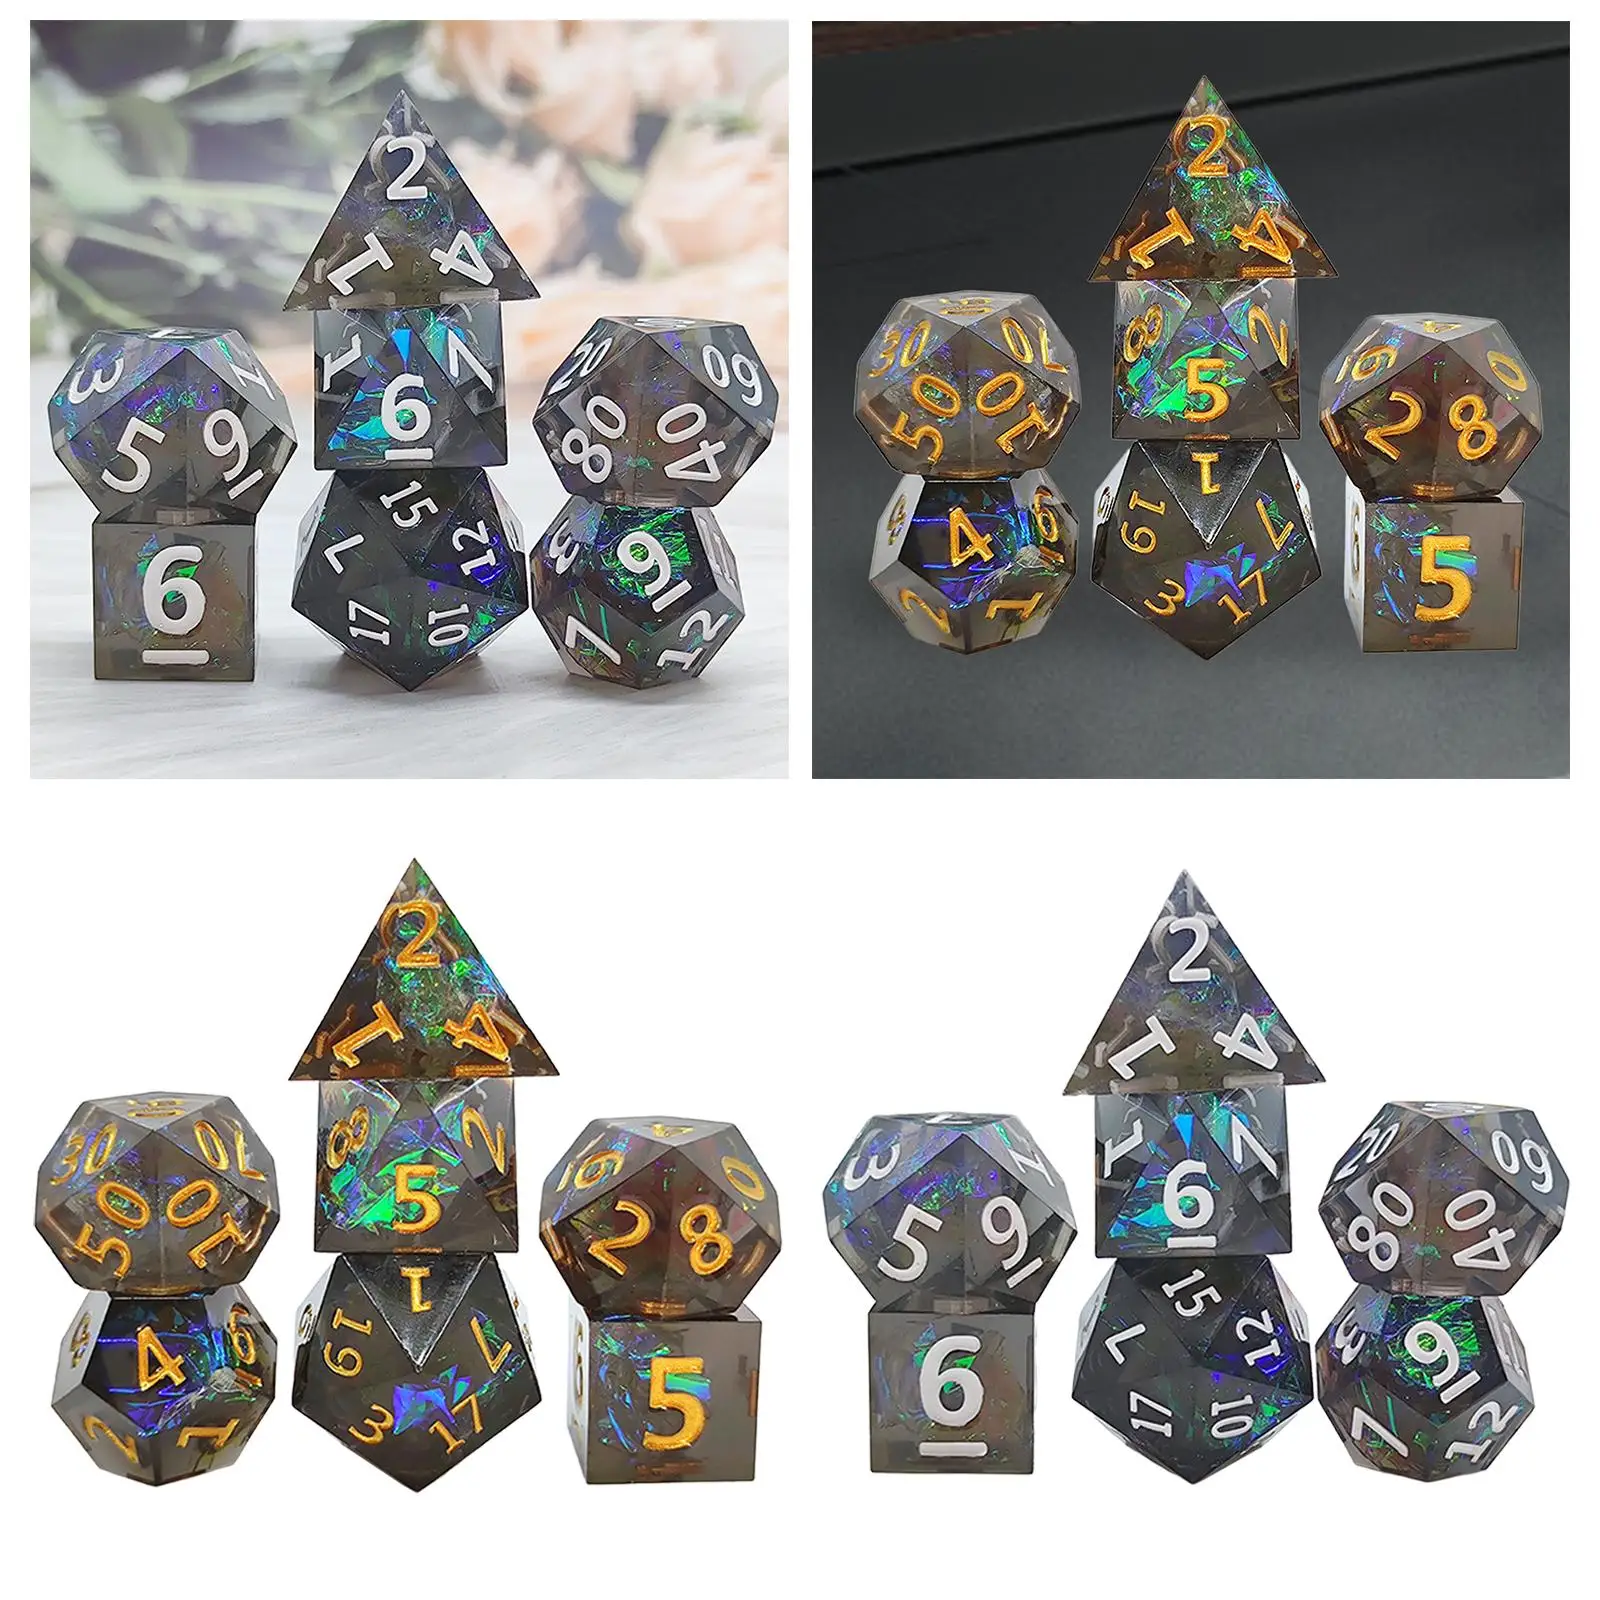 7 Pieces Polyhedral Dice Multi-Colored Transparent for Dungeon and 